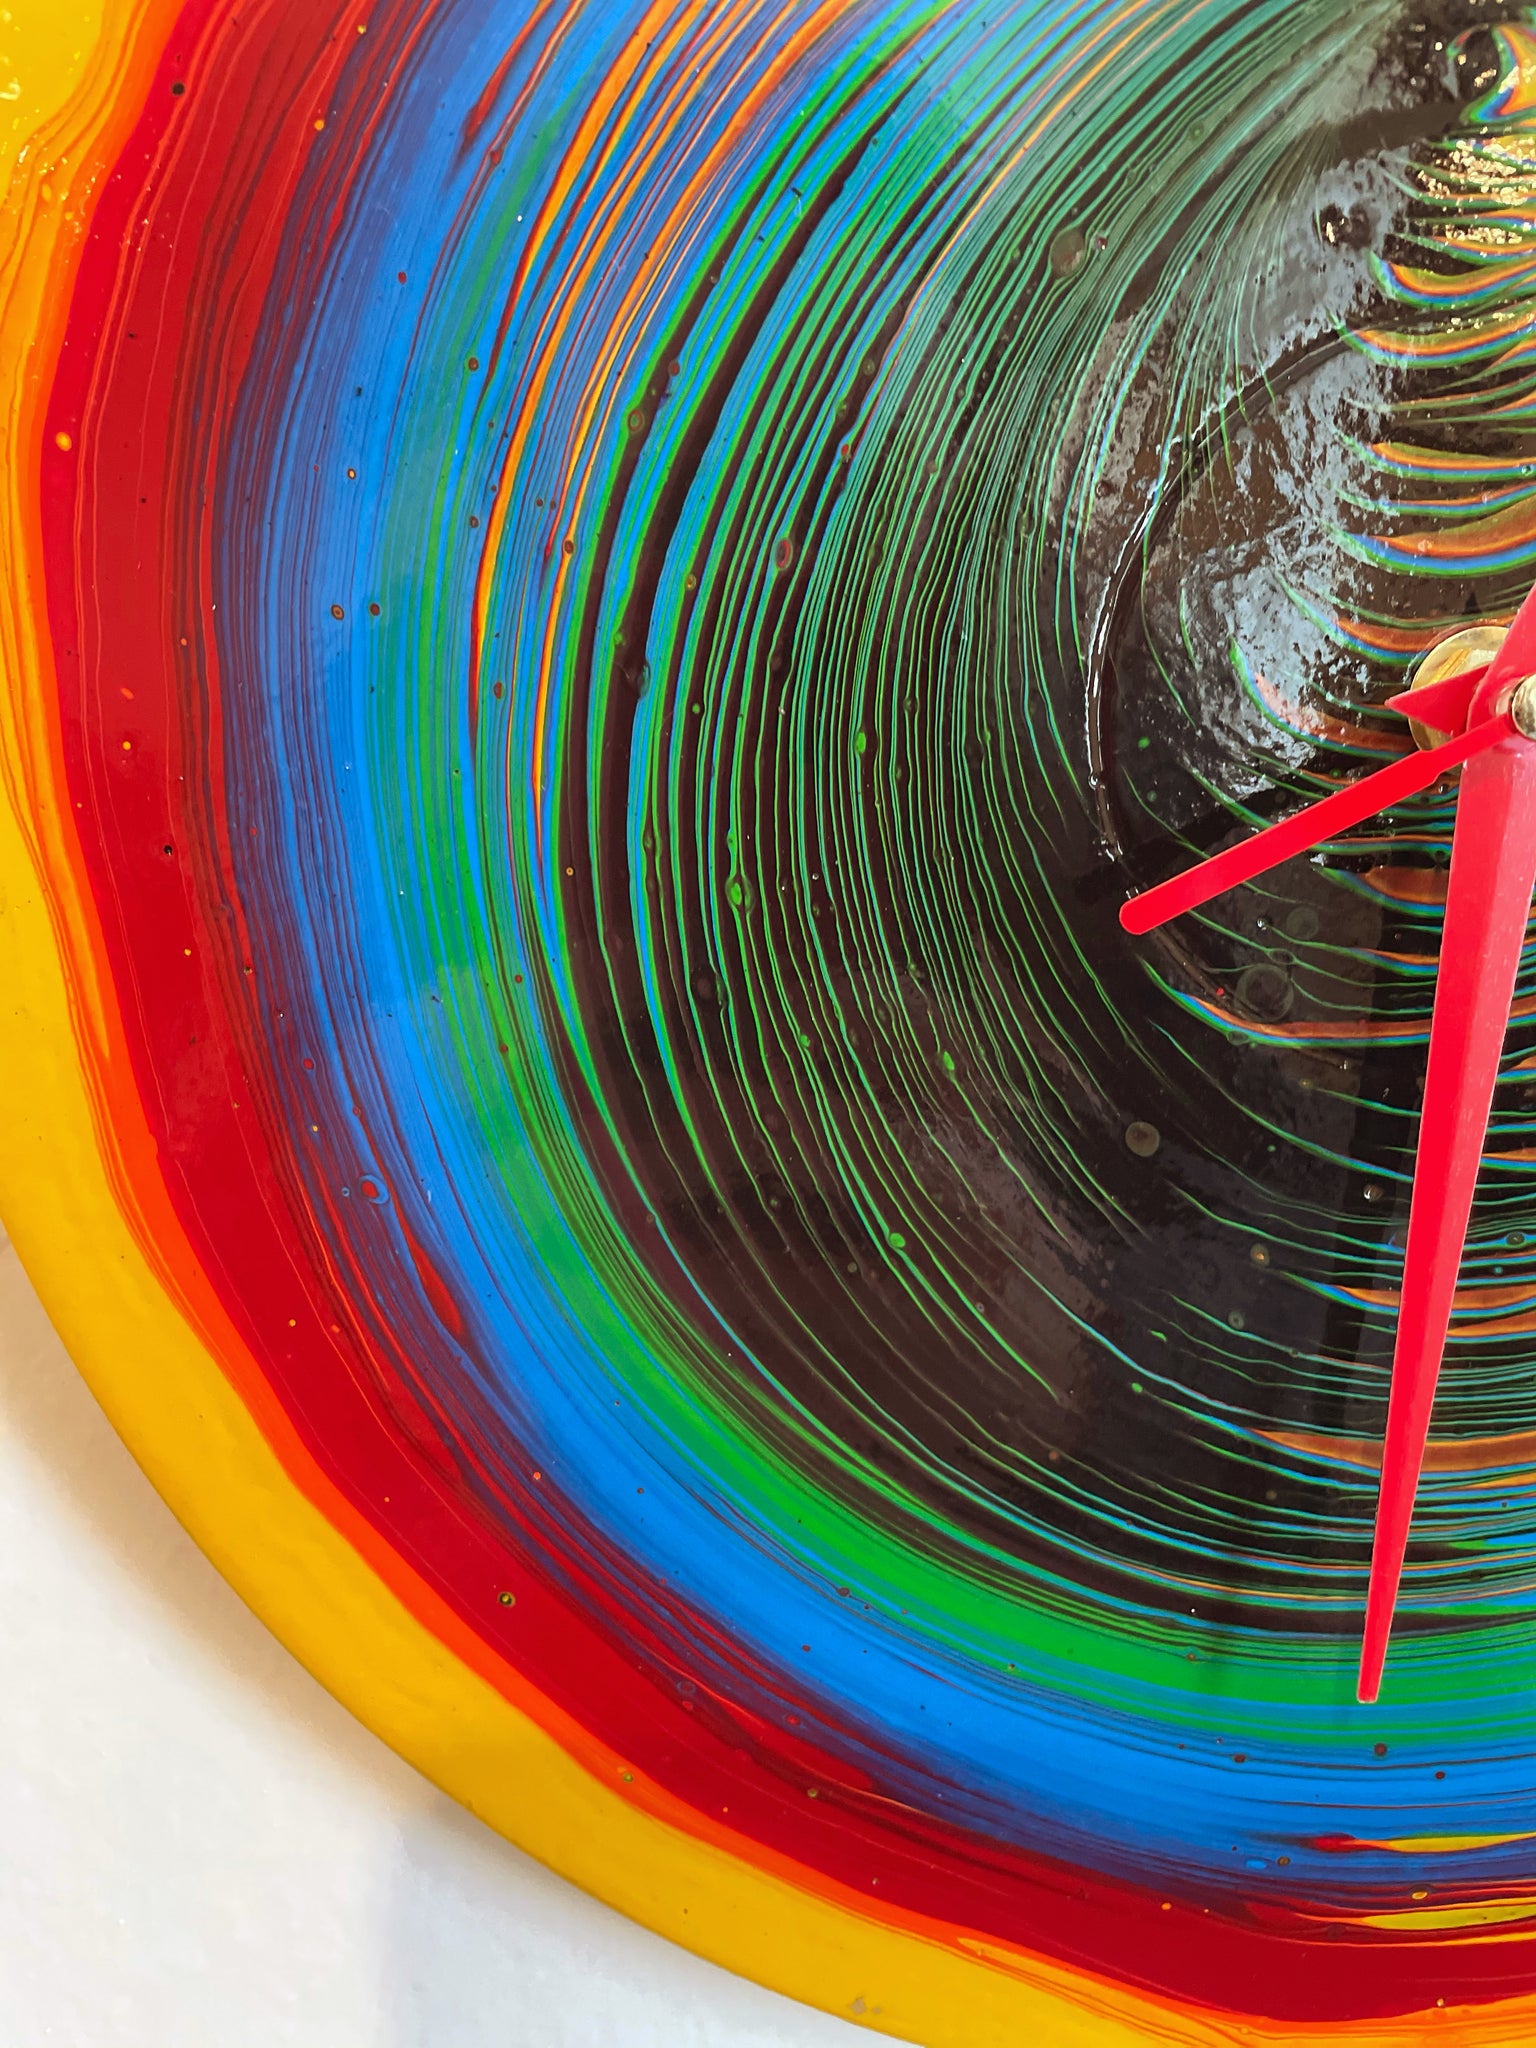 Rainbow Funnel - Upcycled Vinyl Record Pour Painting Clock